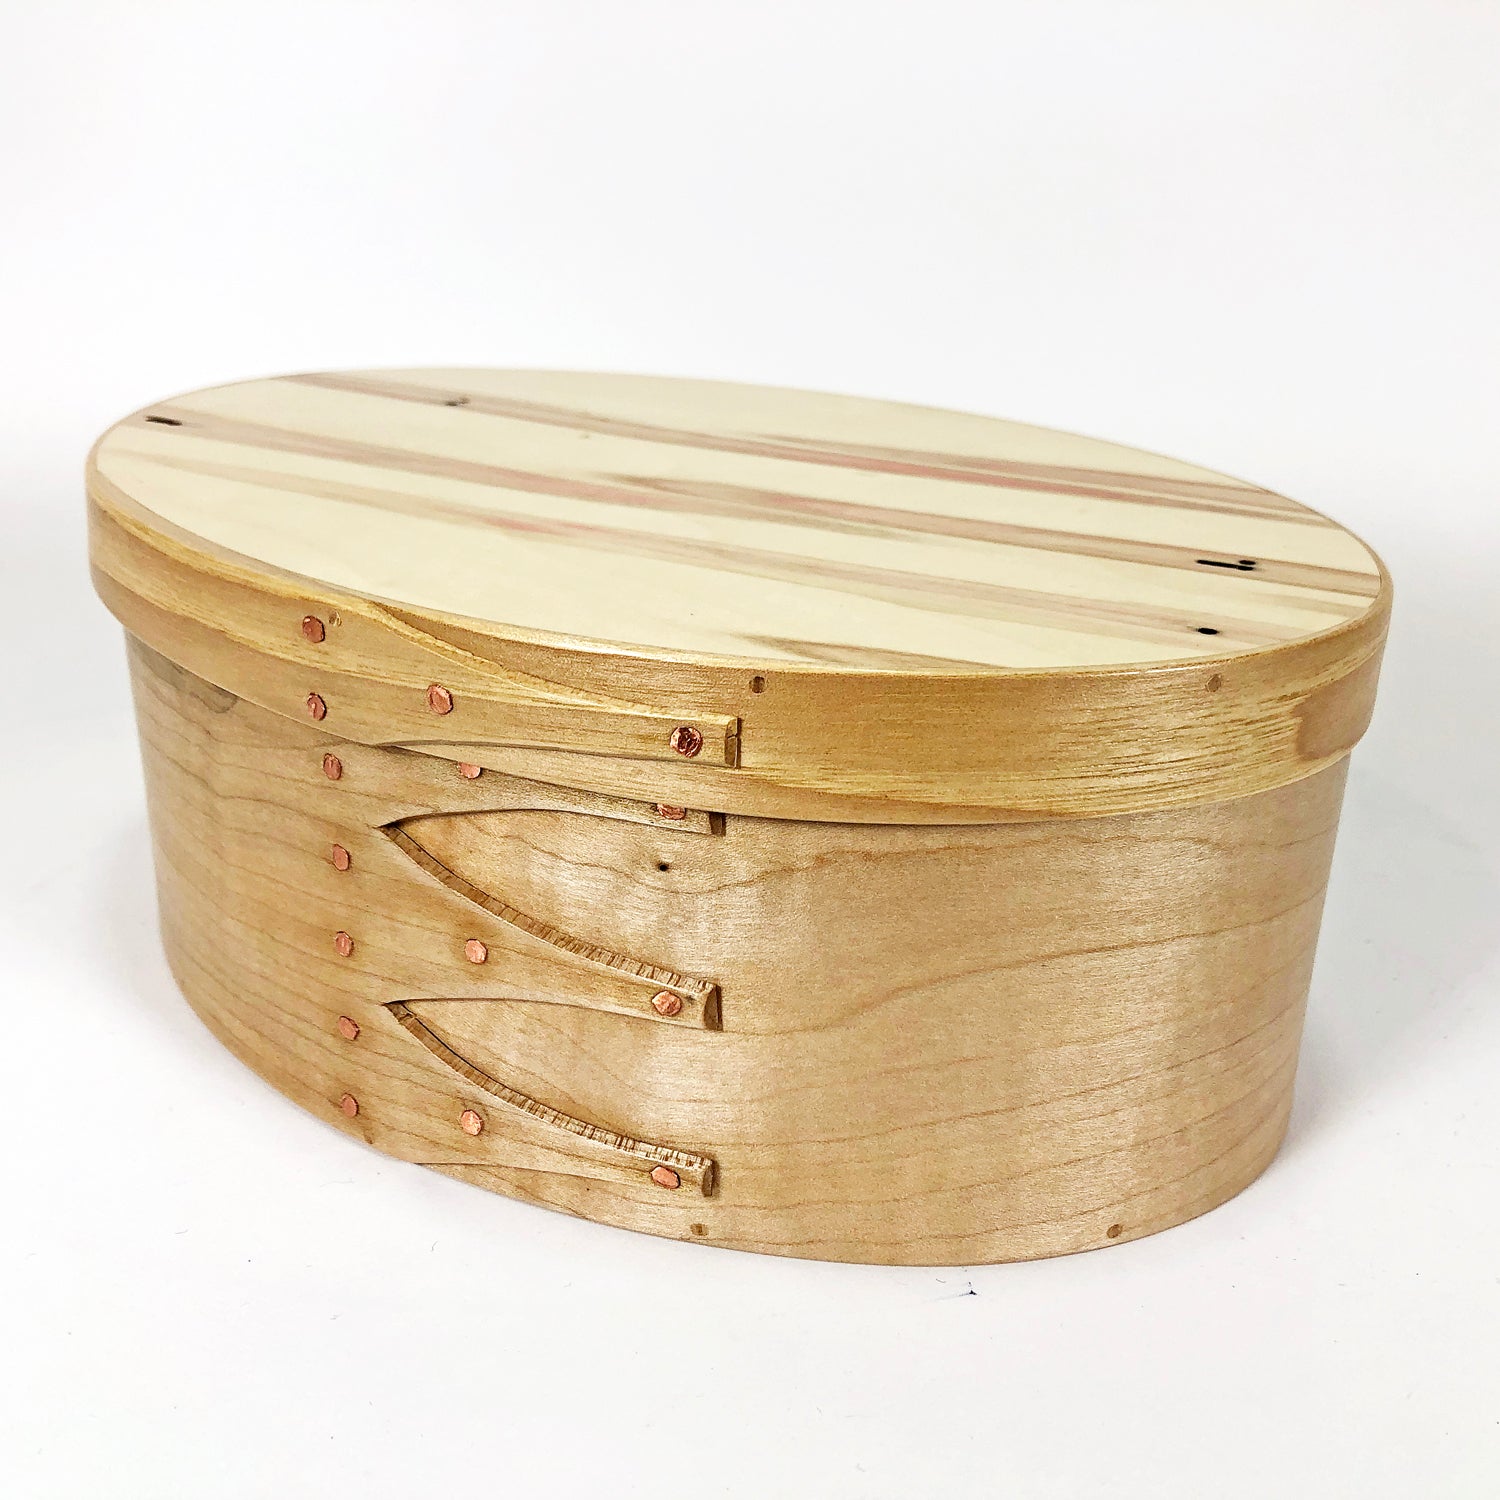 Spalted Maple #4 Shaker Box